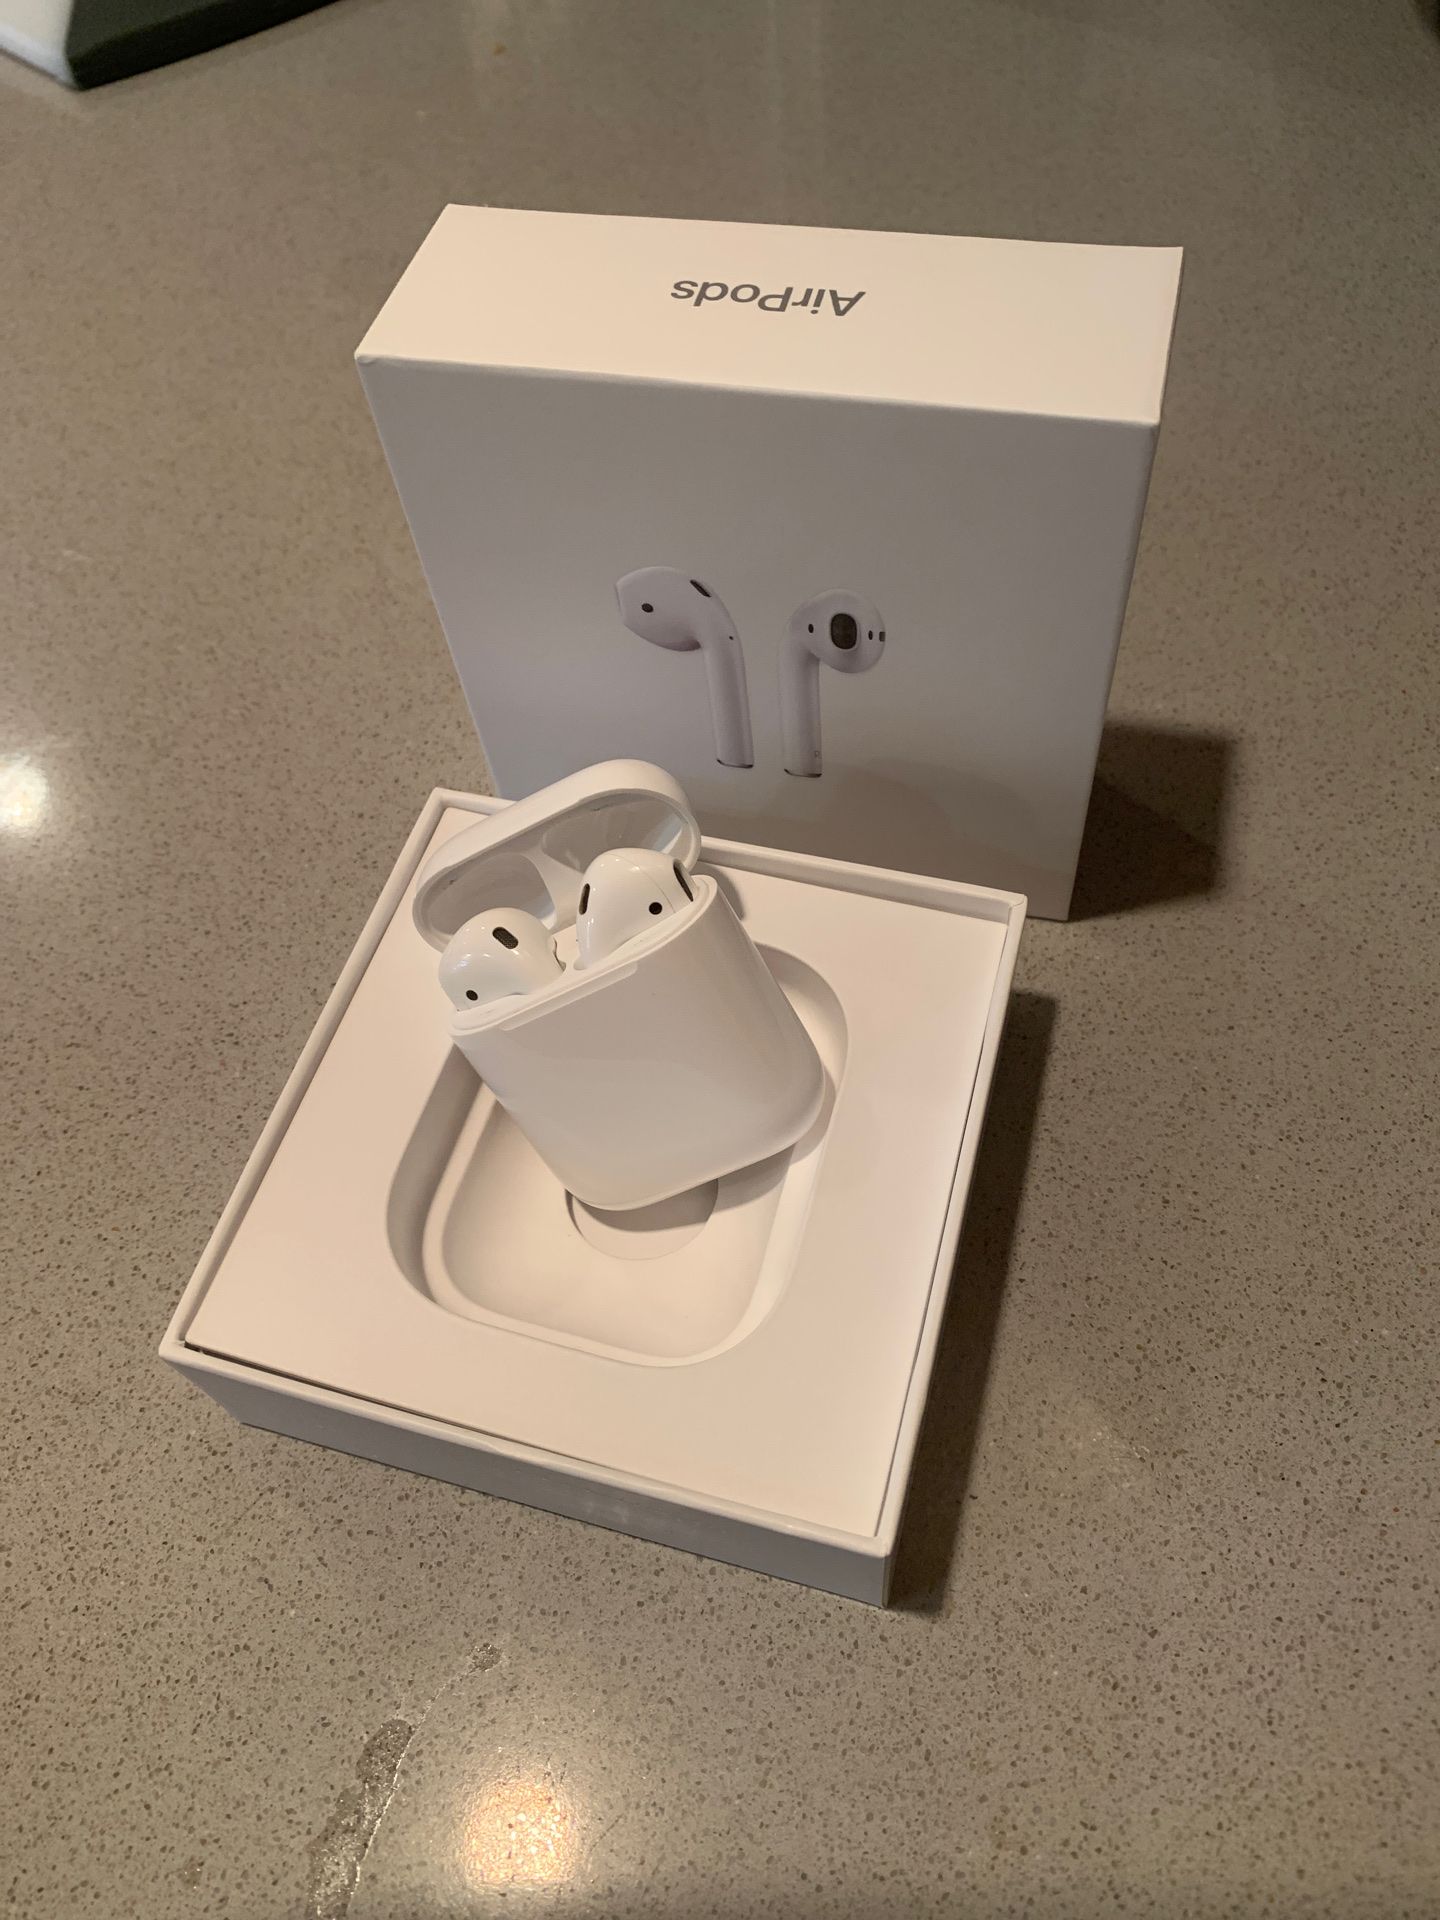 Apple AirPods 2nd gen - firm in price